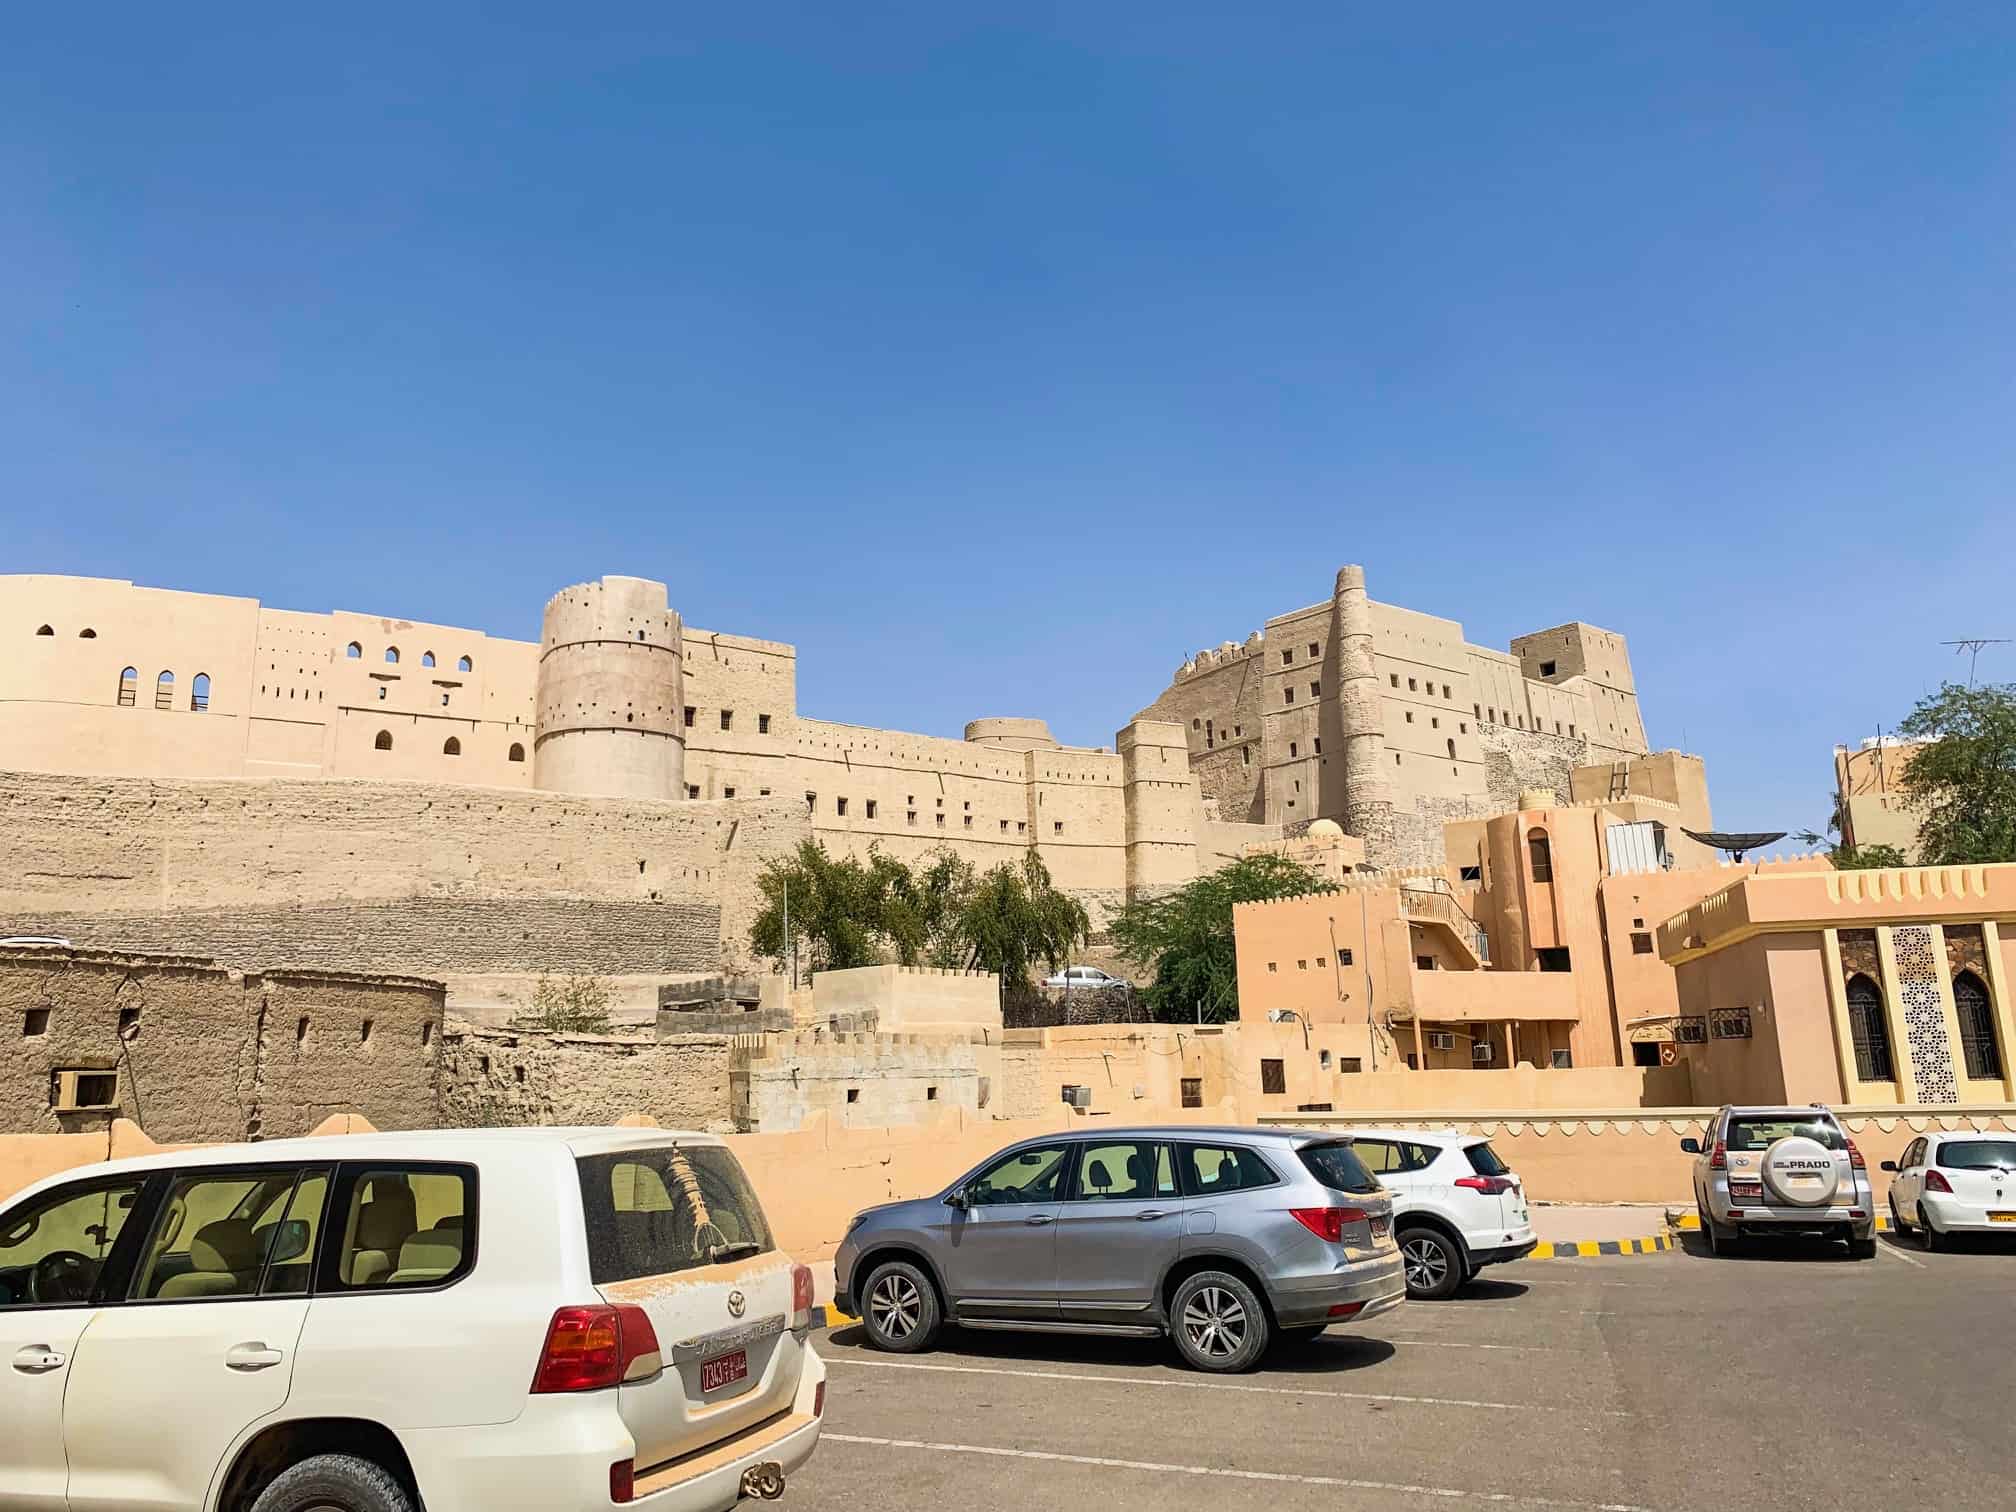 The parking lot at Bahla Fort